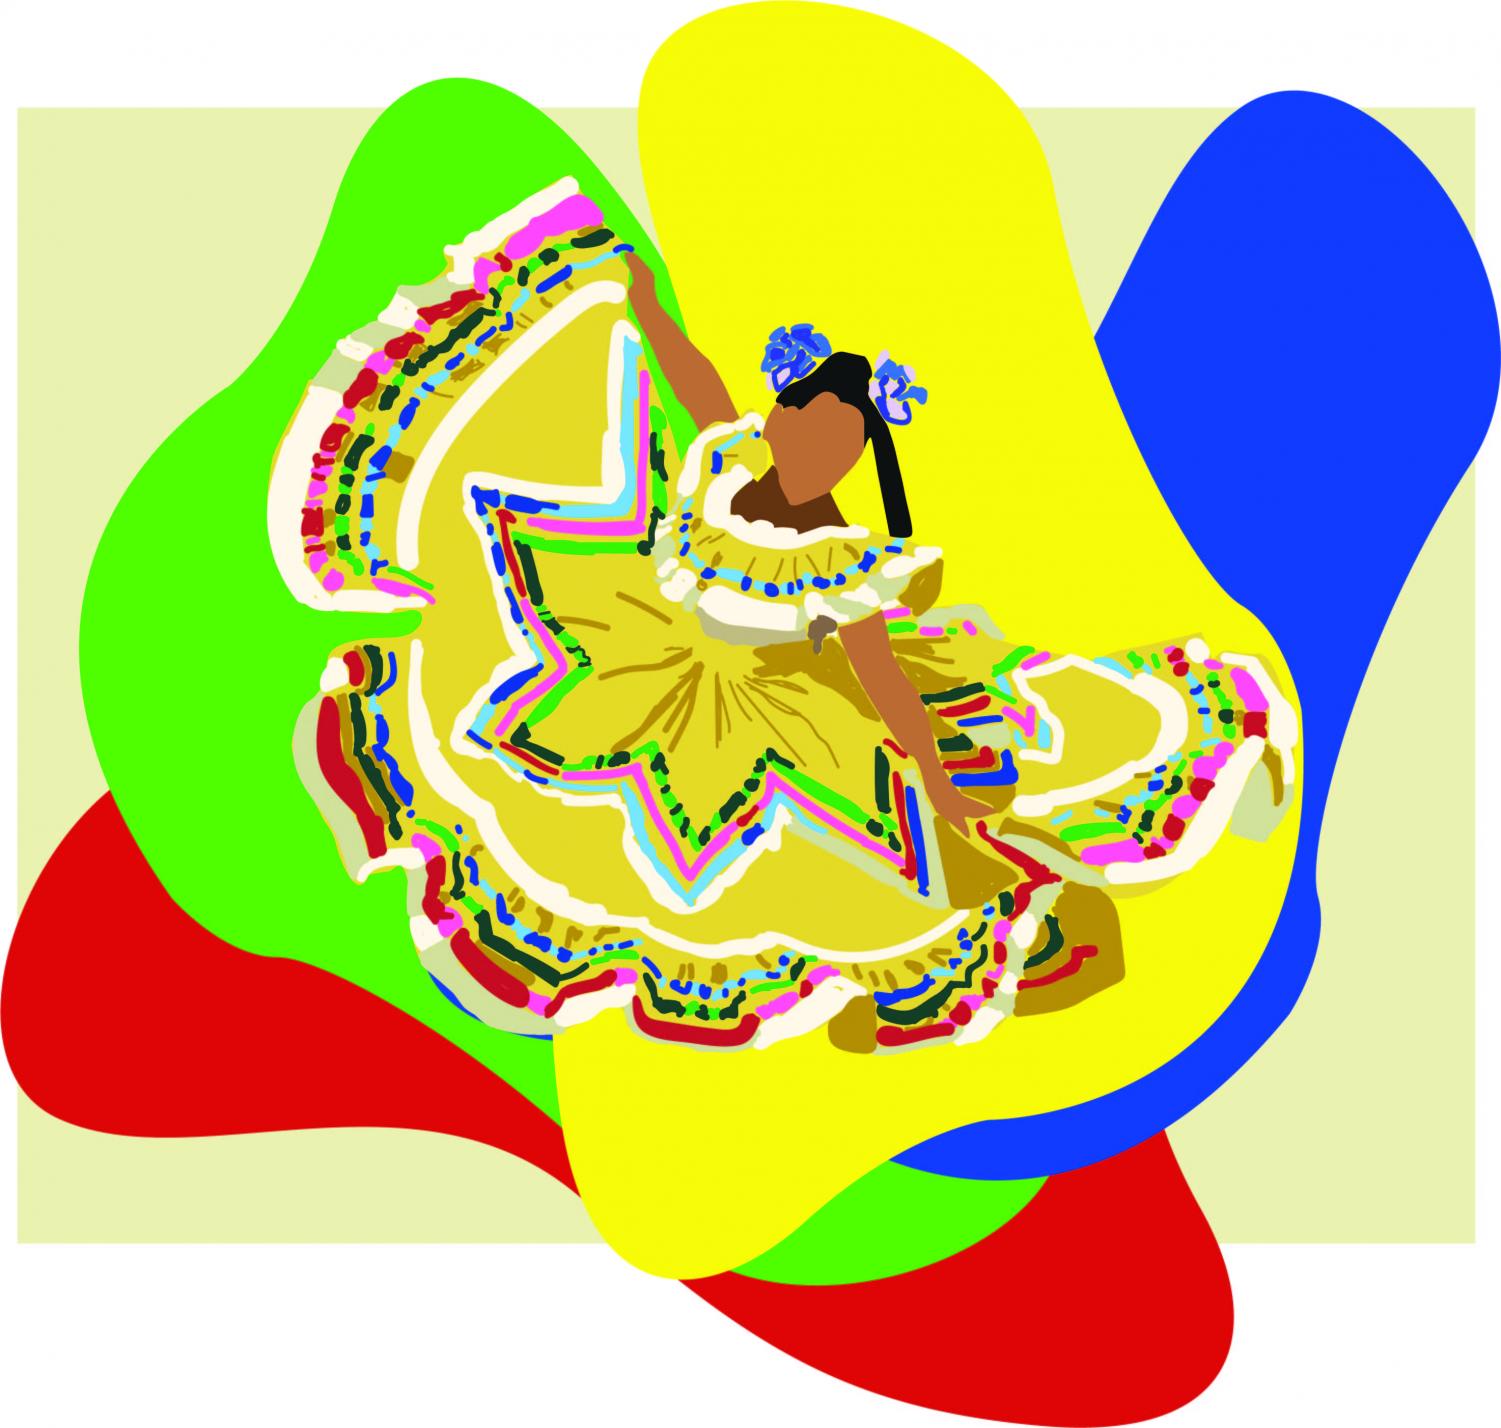 In+the+past%2C+Hispanic+culture+has+been+celebrated+with+lively+festivals.+Hispanic+Heritage+Month+%28Sept.+15+to+Oct.+15%29+welcomes+this+celebration+and+aids+in+the+embracing+of+culture+around+the+world.+Art+by+Rory+Knettles